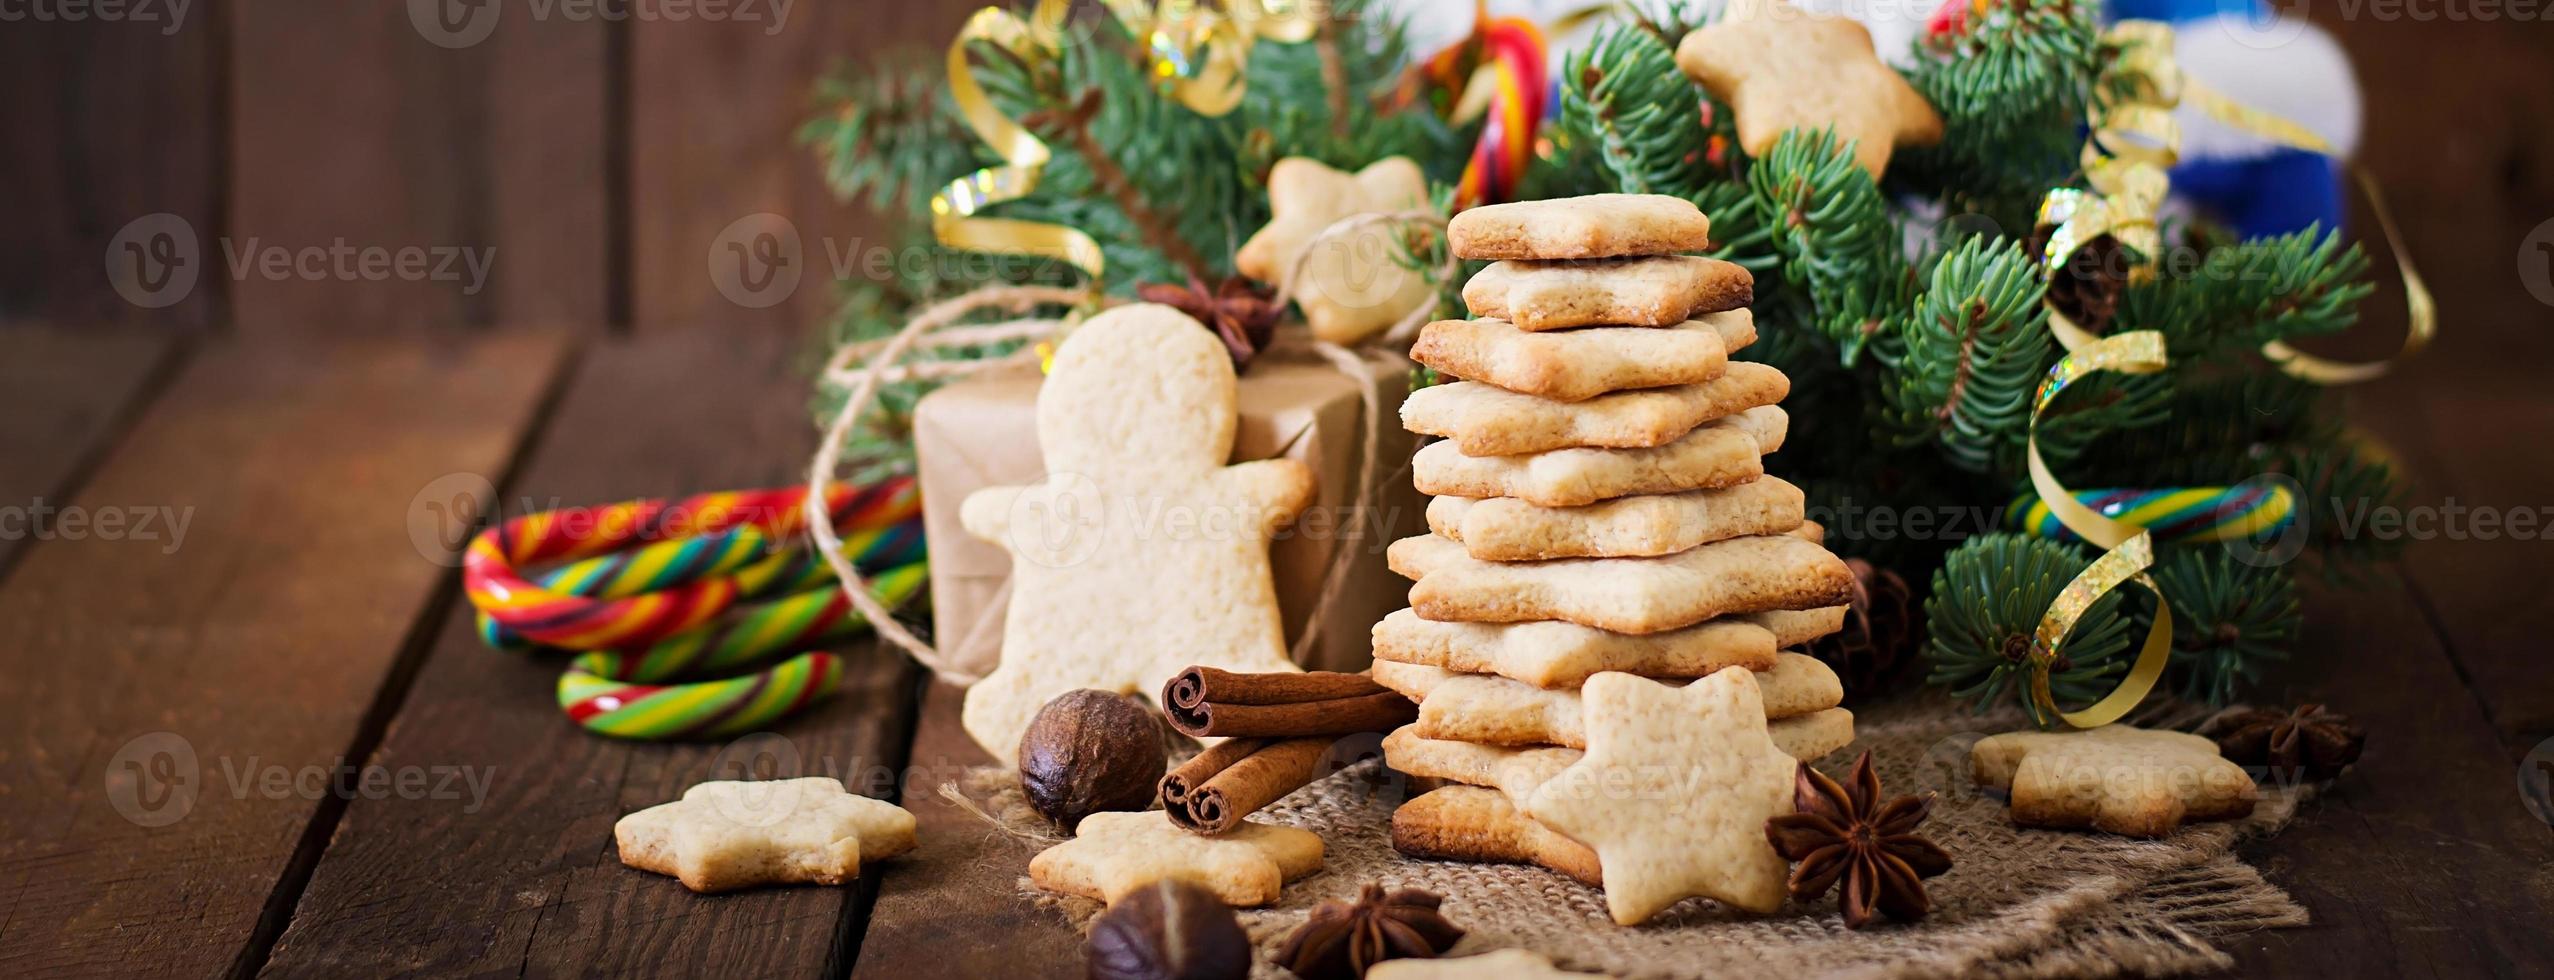 Christmas cookies and tinsel on a wooden background photo